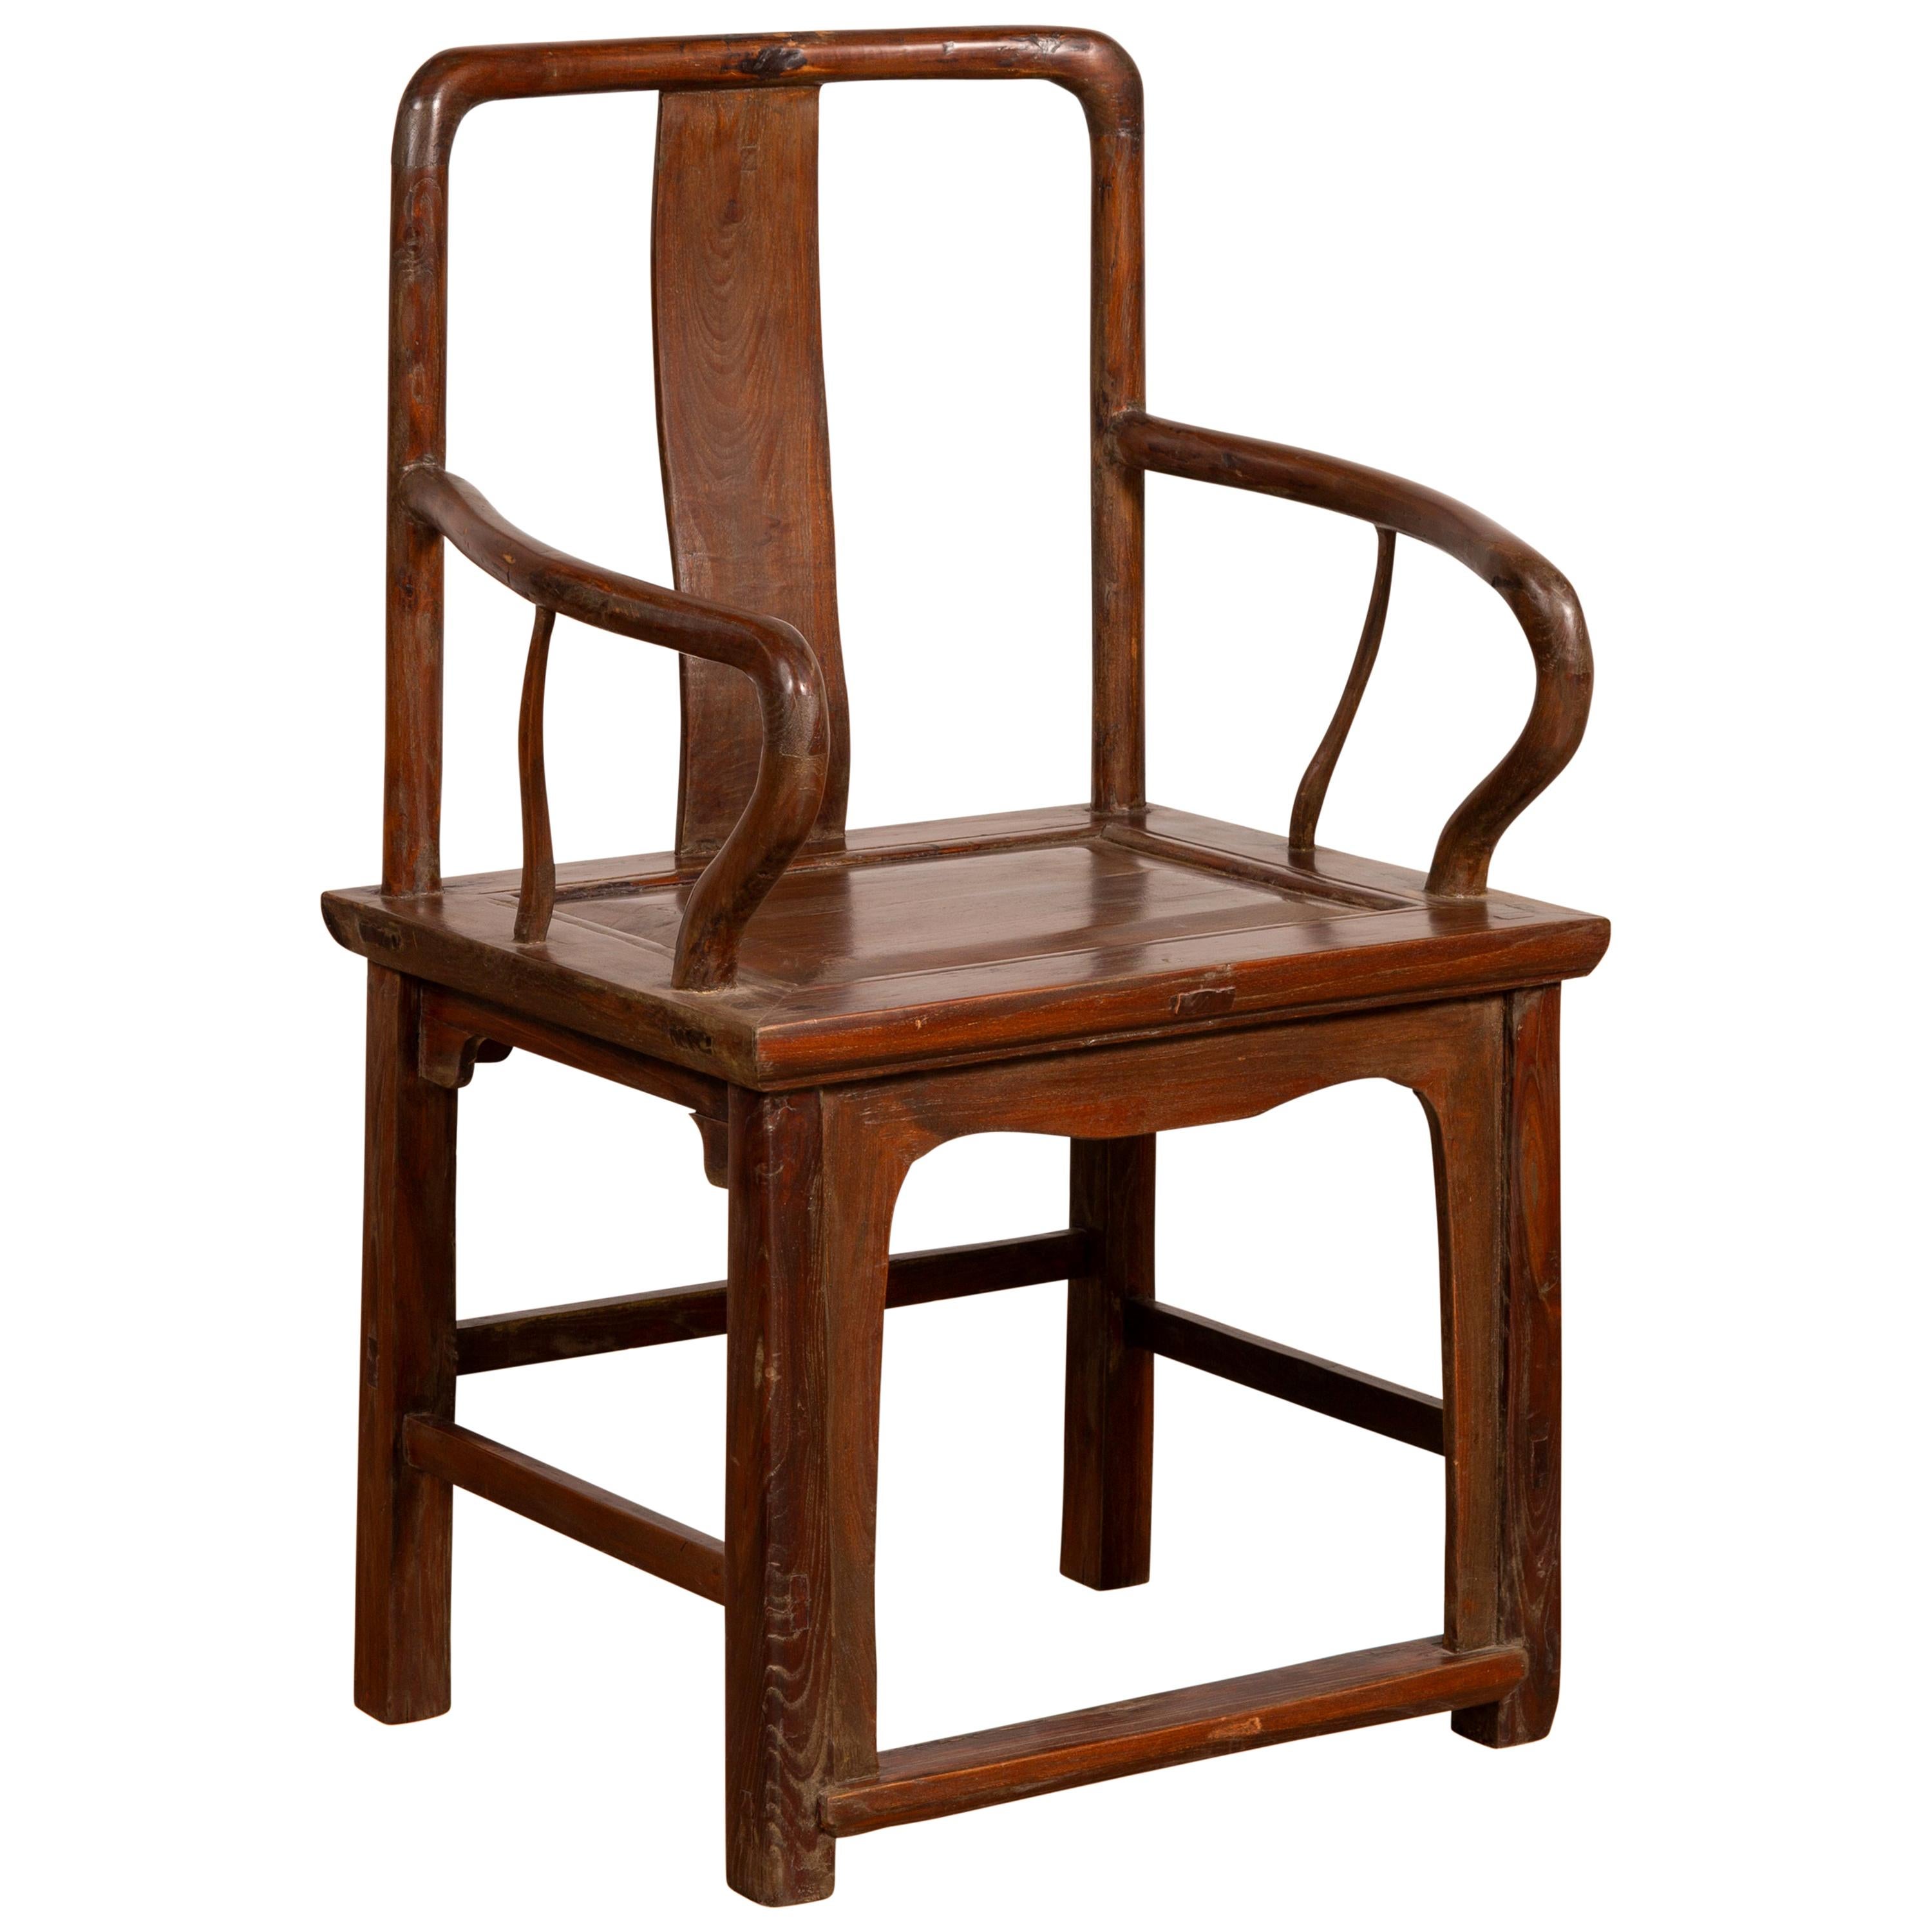 Chinese Ming Dynasty Style Elmwood Armchair with Open Back and Curving Arms